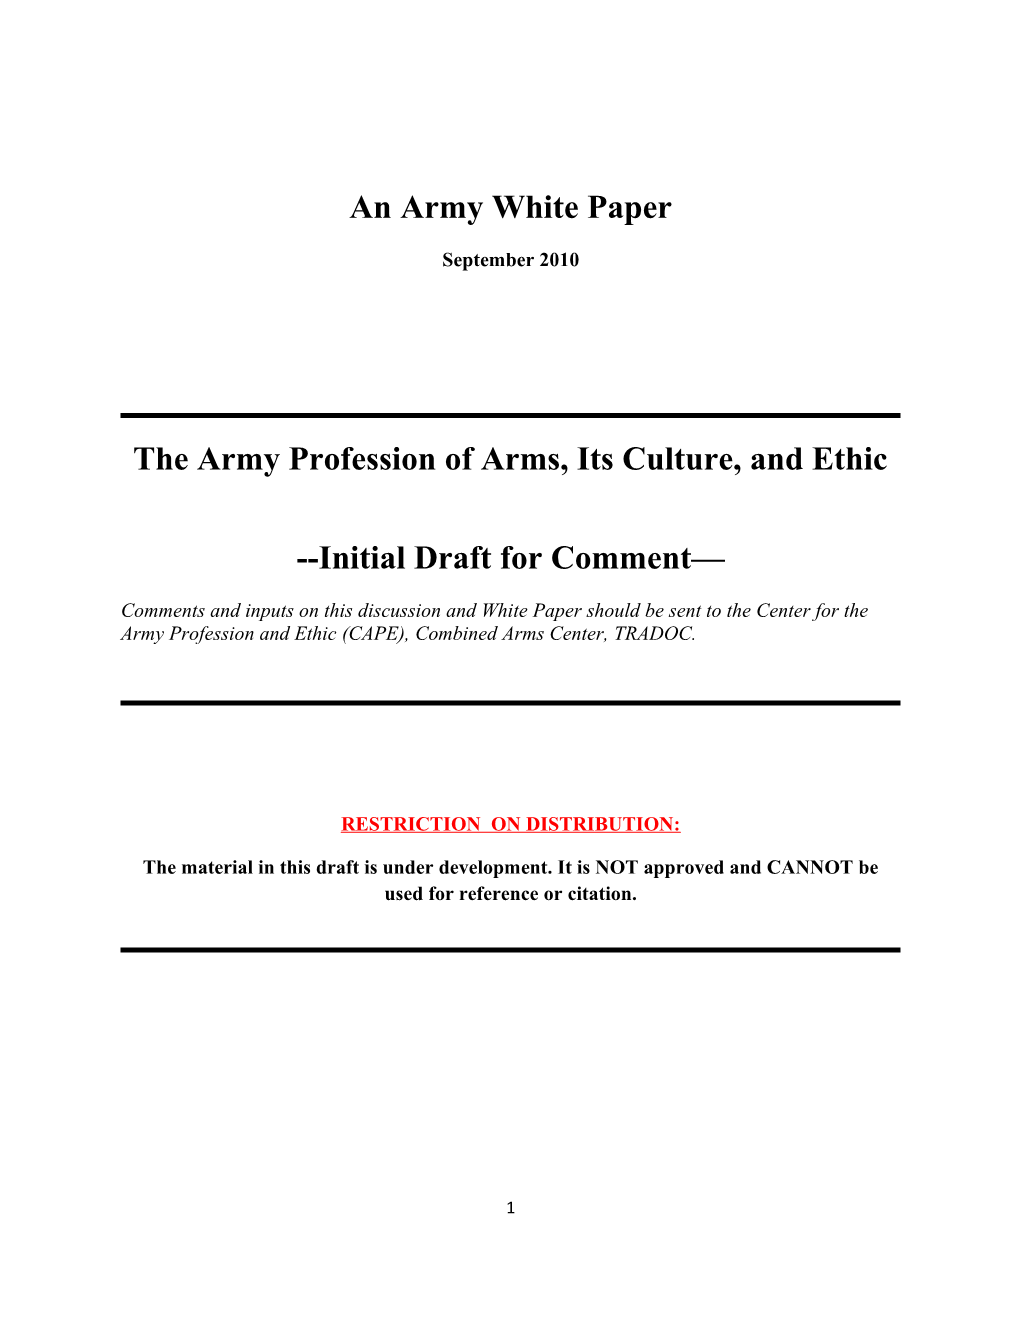 The Army Profession of Arms, Its Culture, and Ethic